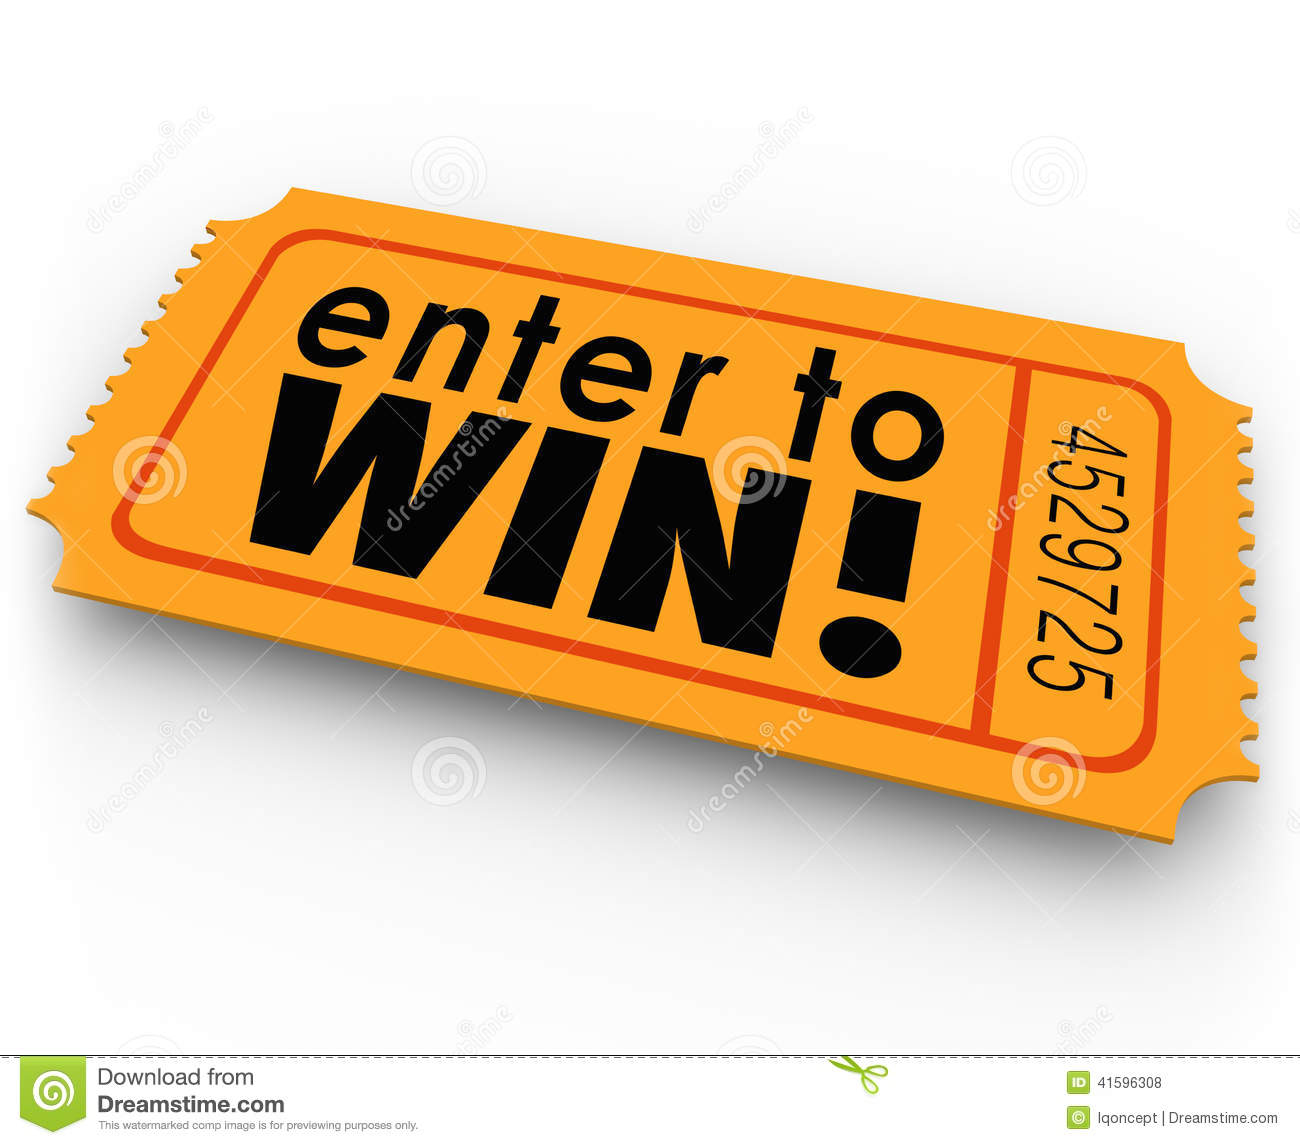 Win Words On An Orange Ticket For A Raffle Or Jackpt Drawing Where You